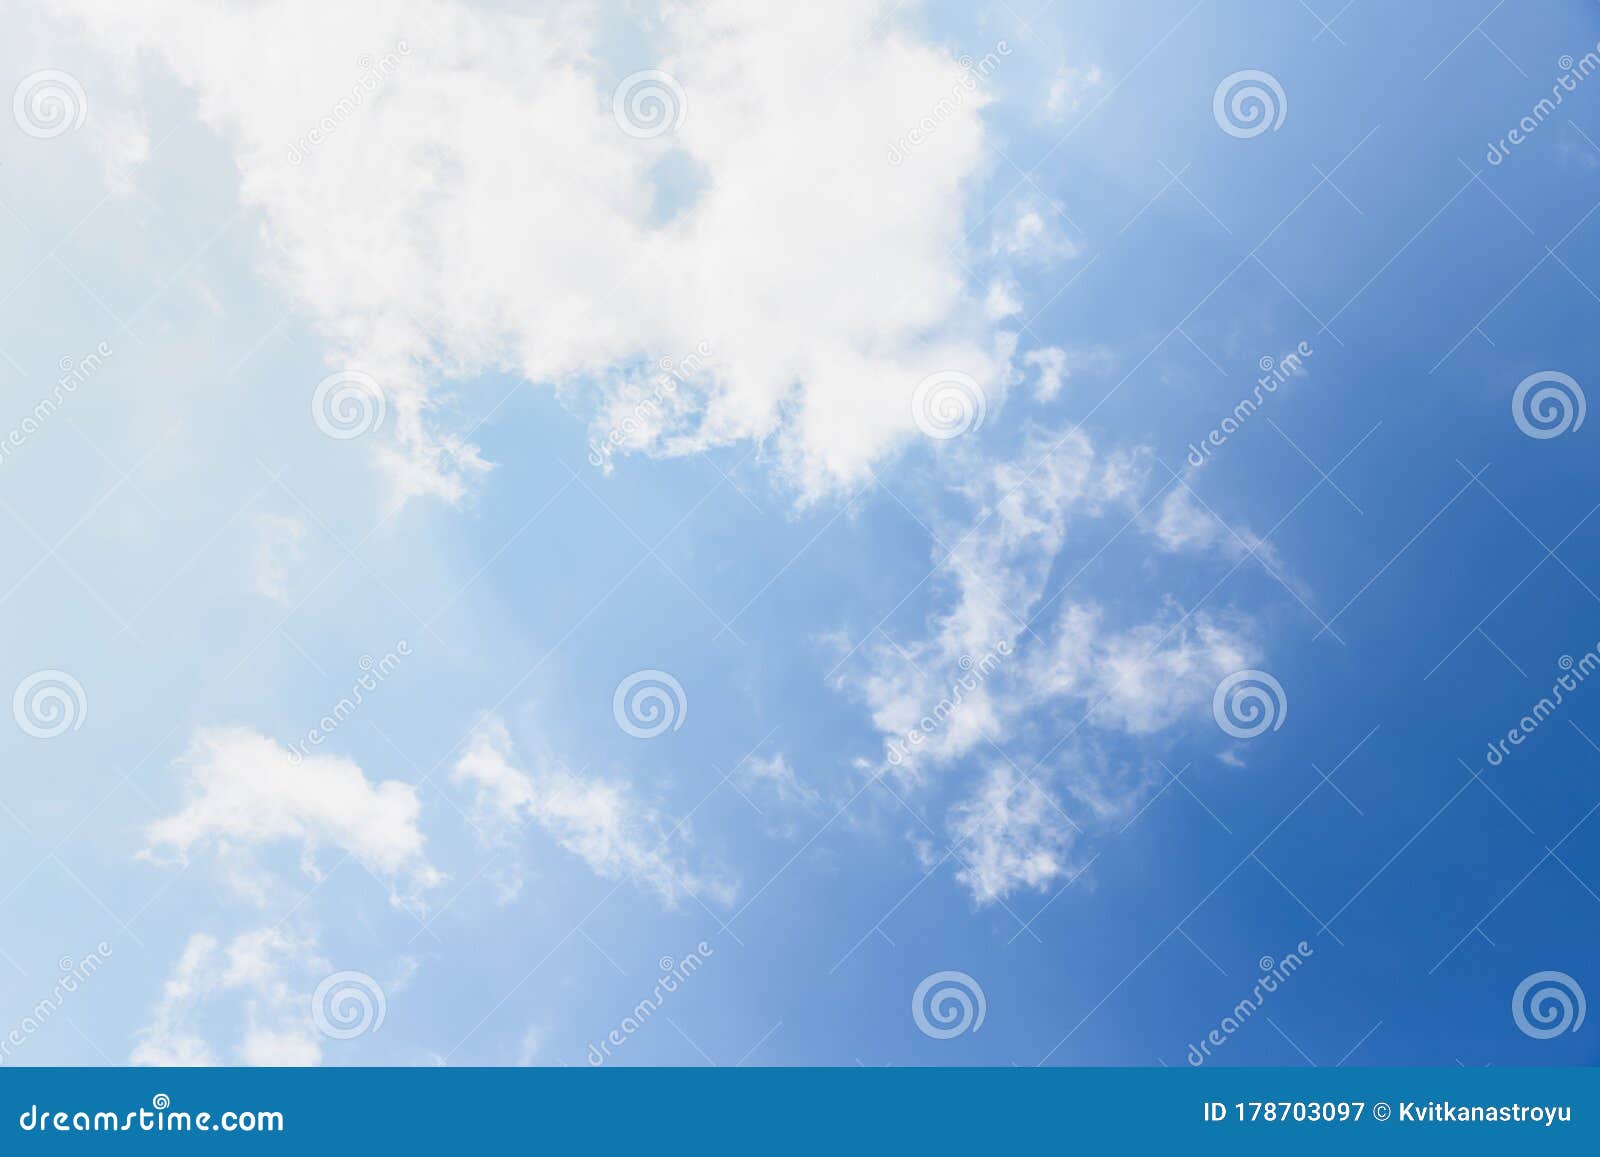 Light Transparent White Light Clouds on a Blue Background Stock Image ...